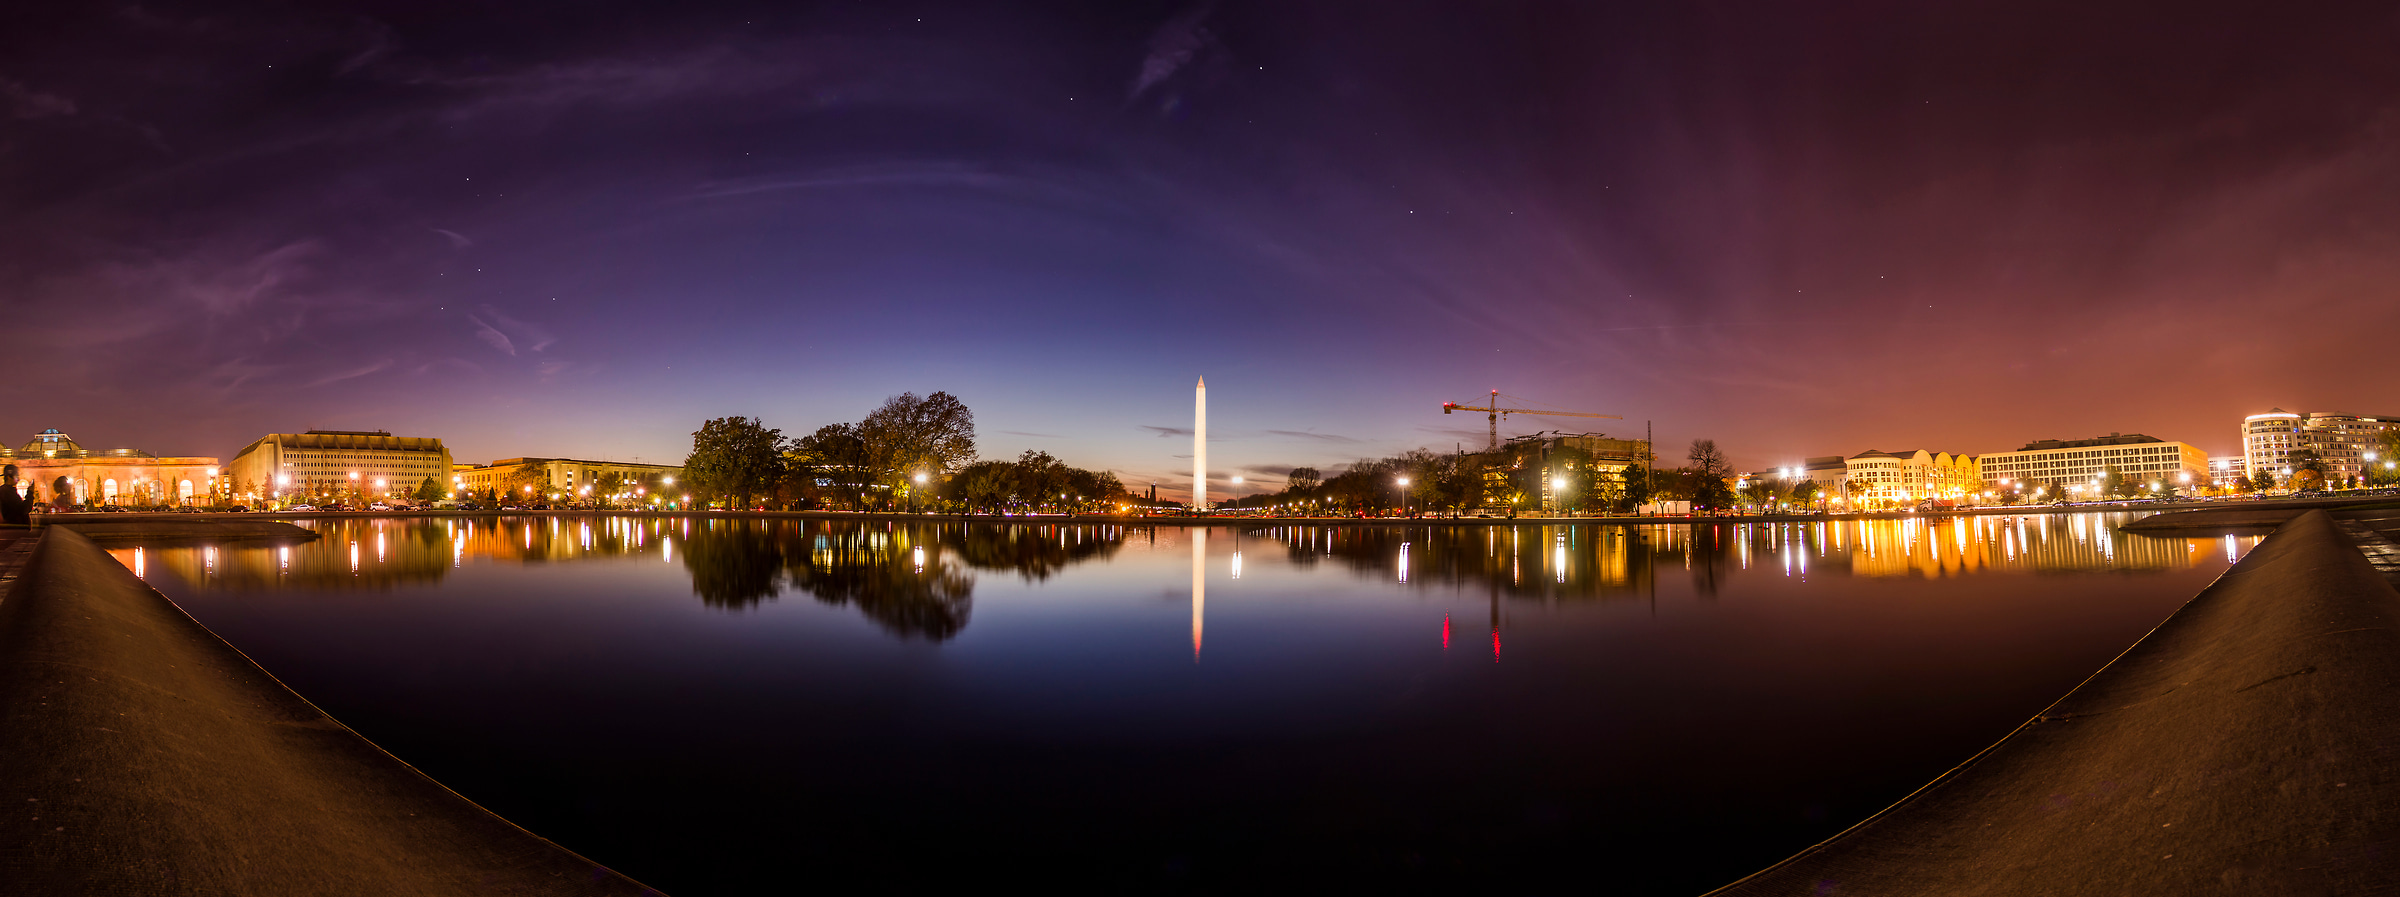 73 megapixels! A very high resolution VAST photo of the National Mall and the Washington Monument reflected in the Reflecting Pools at dusk; created by Dan Piech